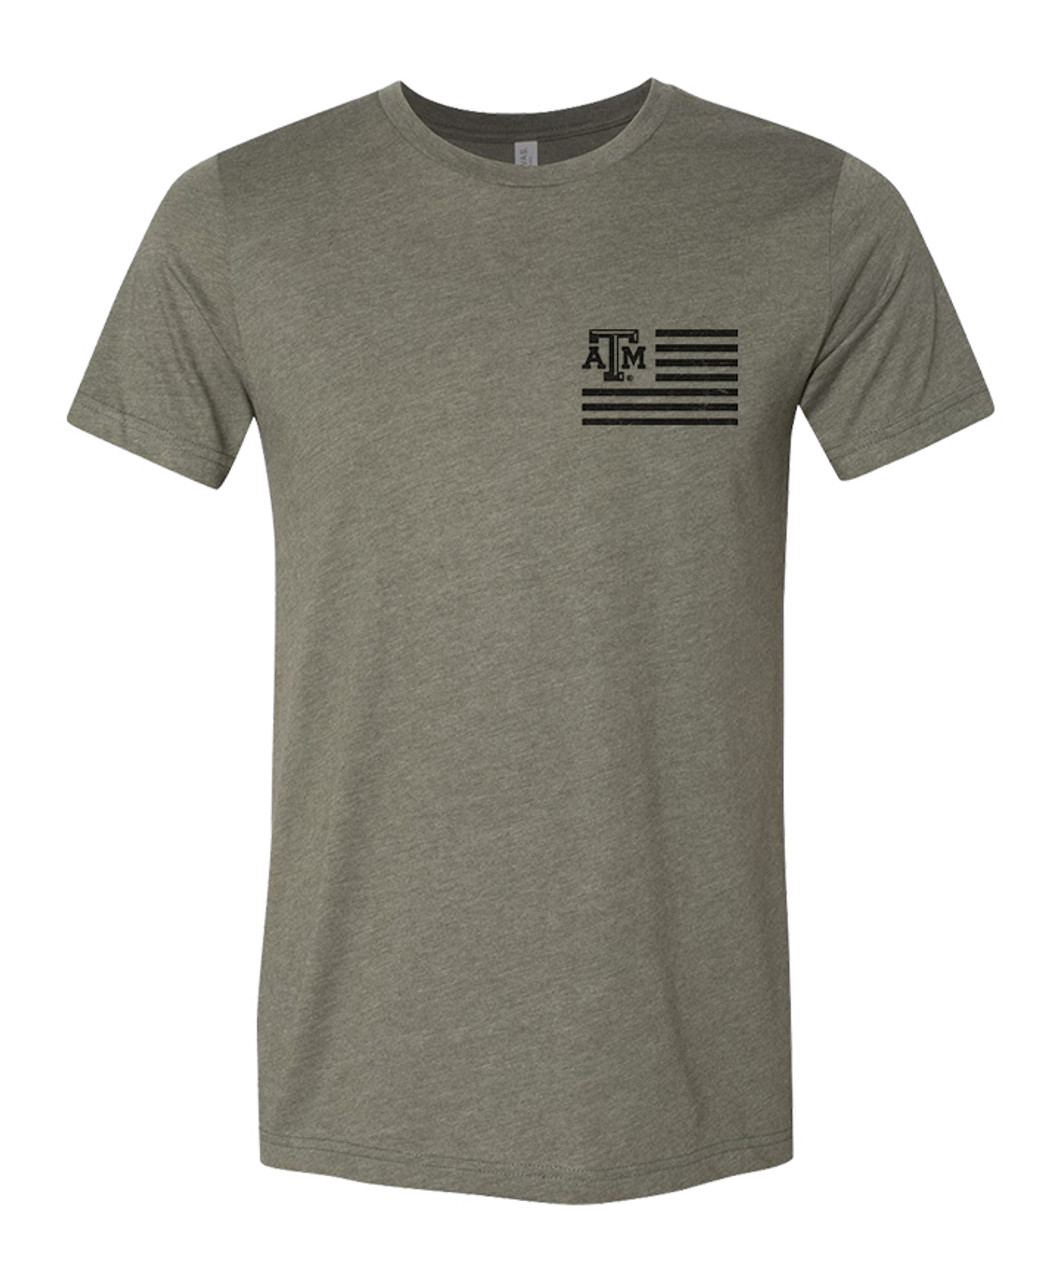 Don't Tread On Me Military Green Short Sleeve T-Shirt - The Warehouse ...